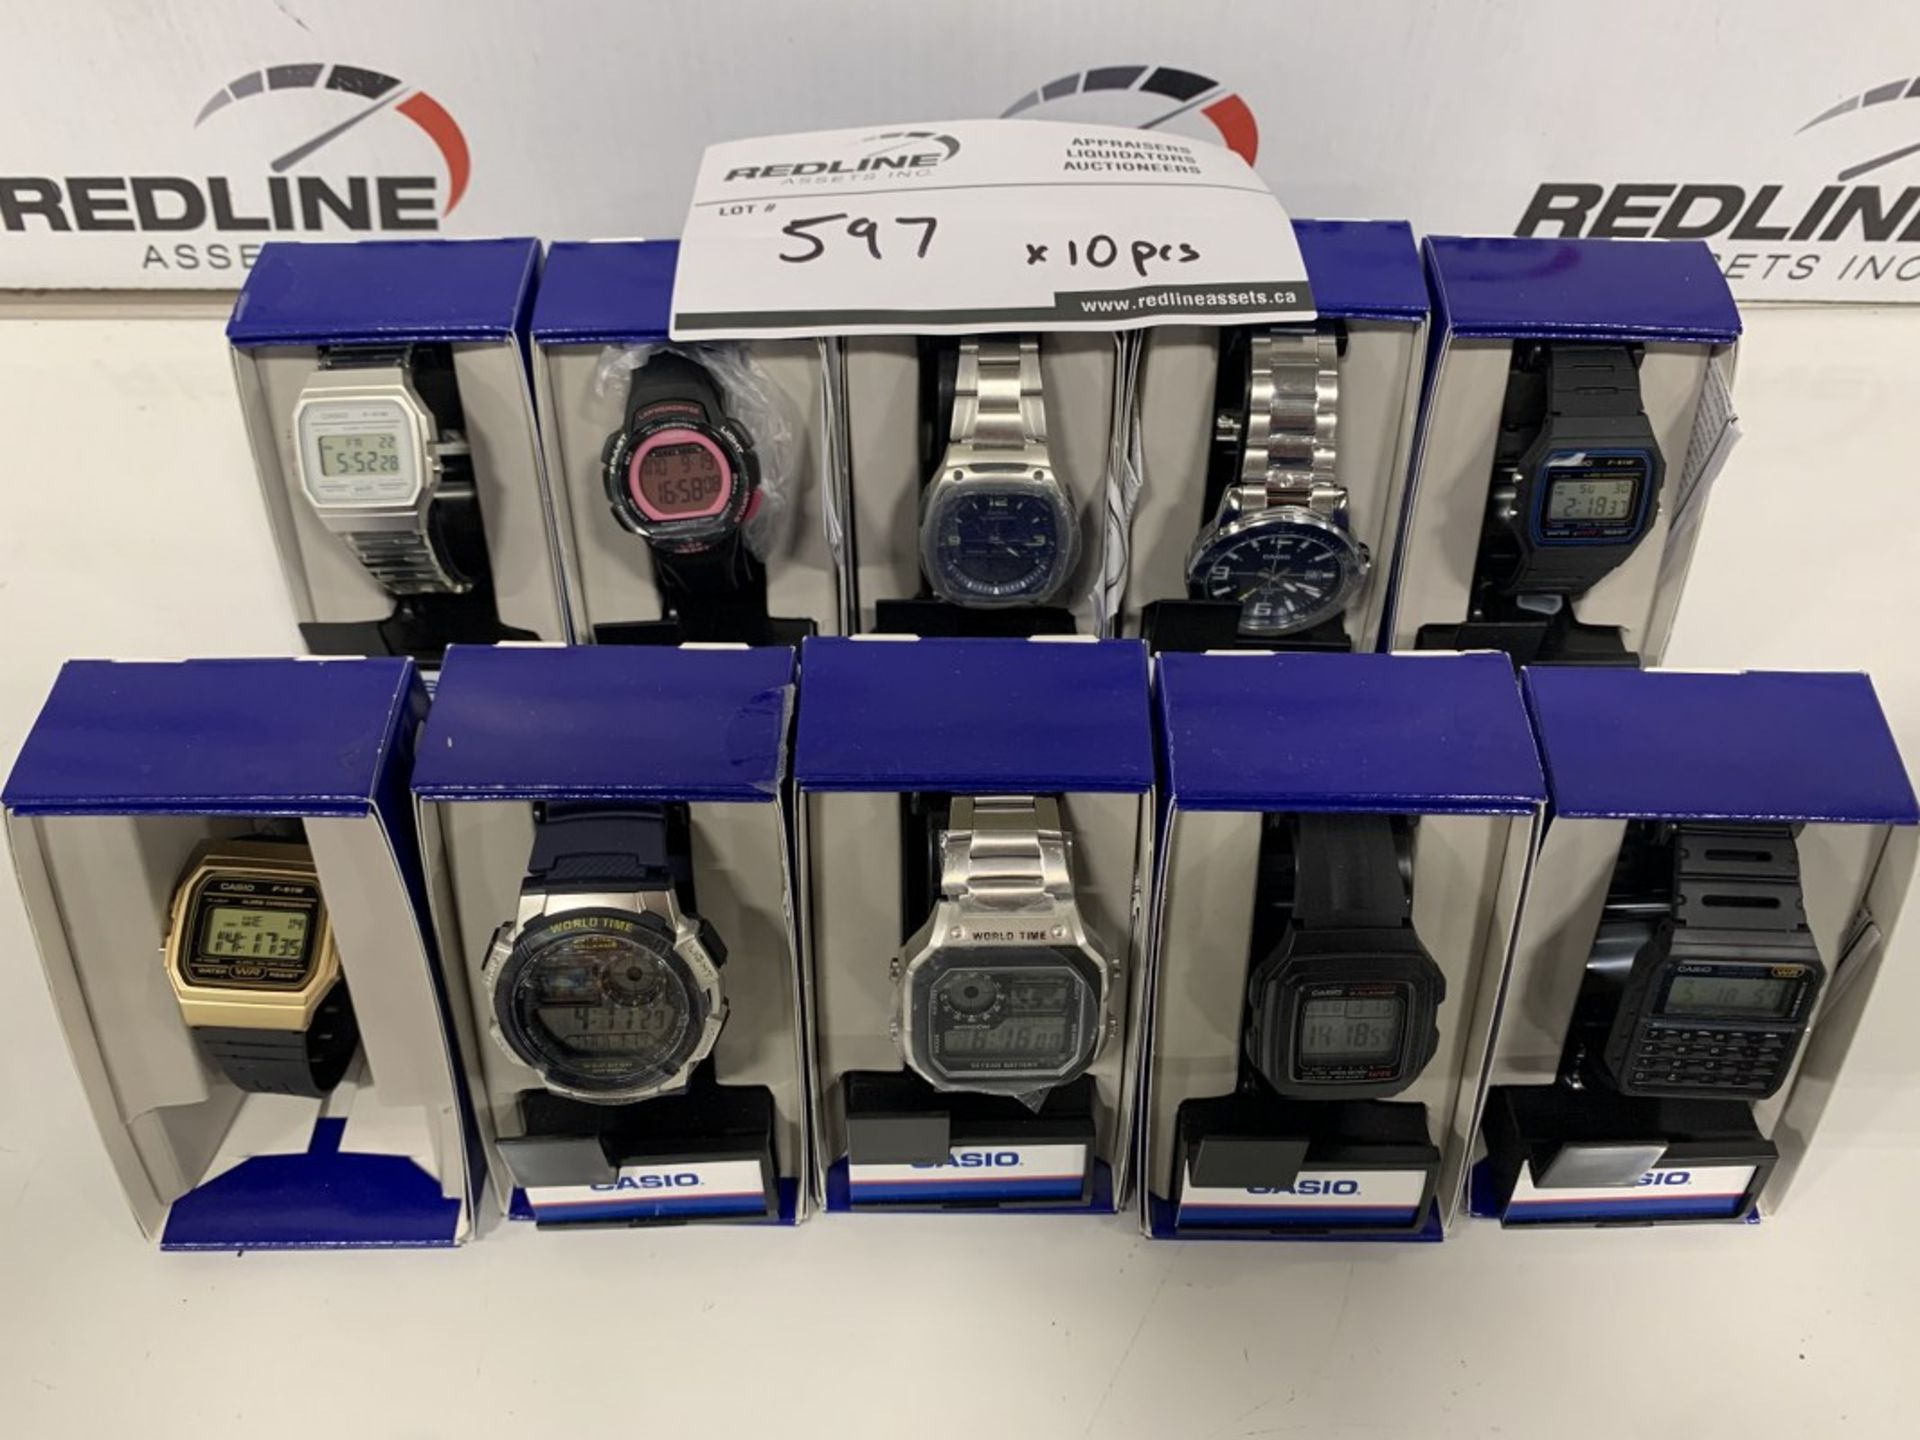 MIXED LOT - ASSORTED CASIO WRIST WATCHES - 10PCS